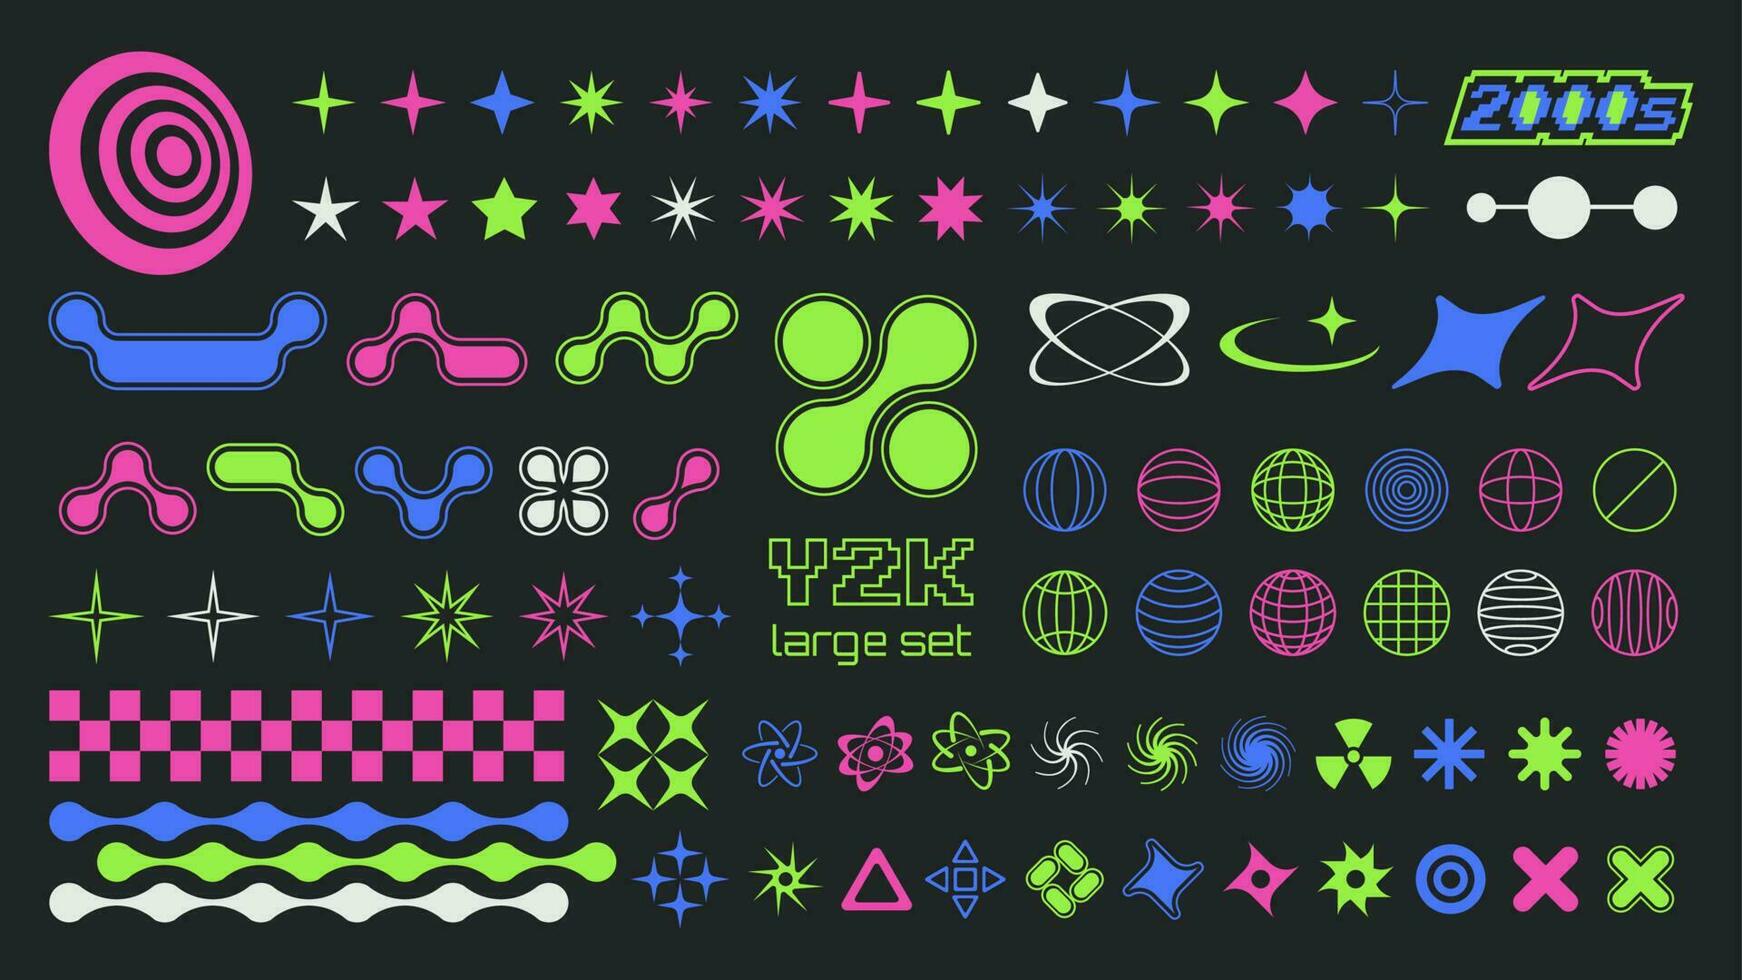 Trendy set of Y2k elements for graphic design. Geometric brutalism shapes, memphis graphic elements. Star shapes, symbols and metaballs in y2k style. vector